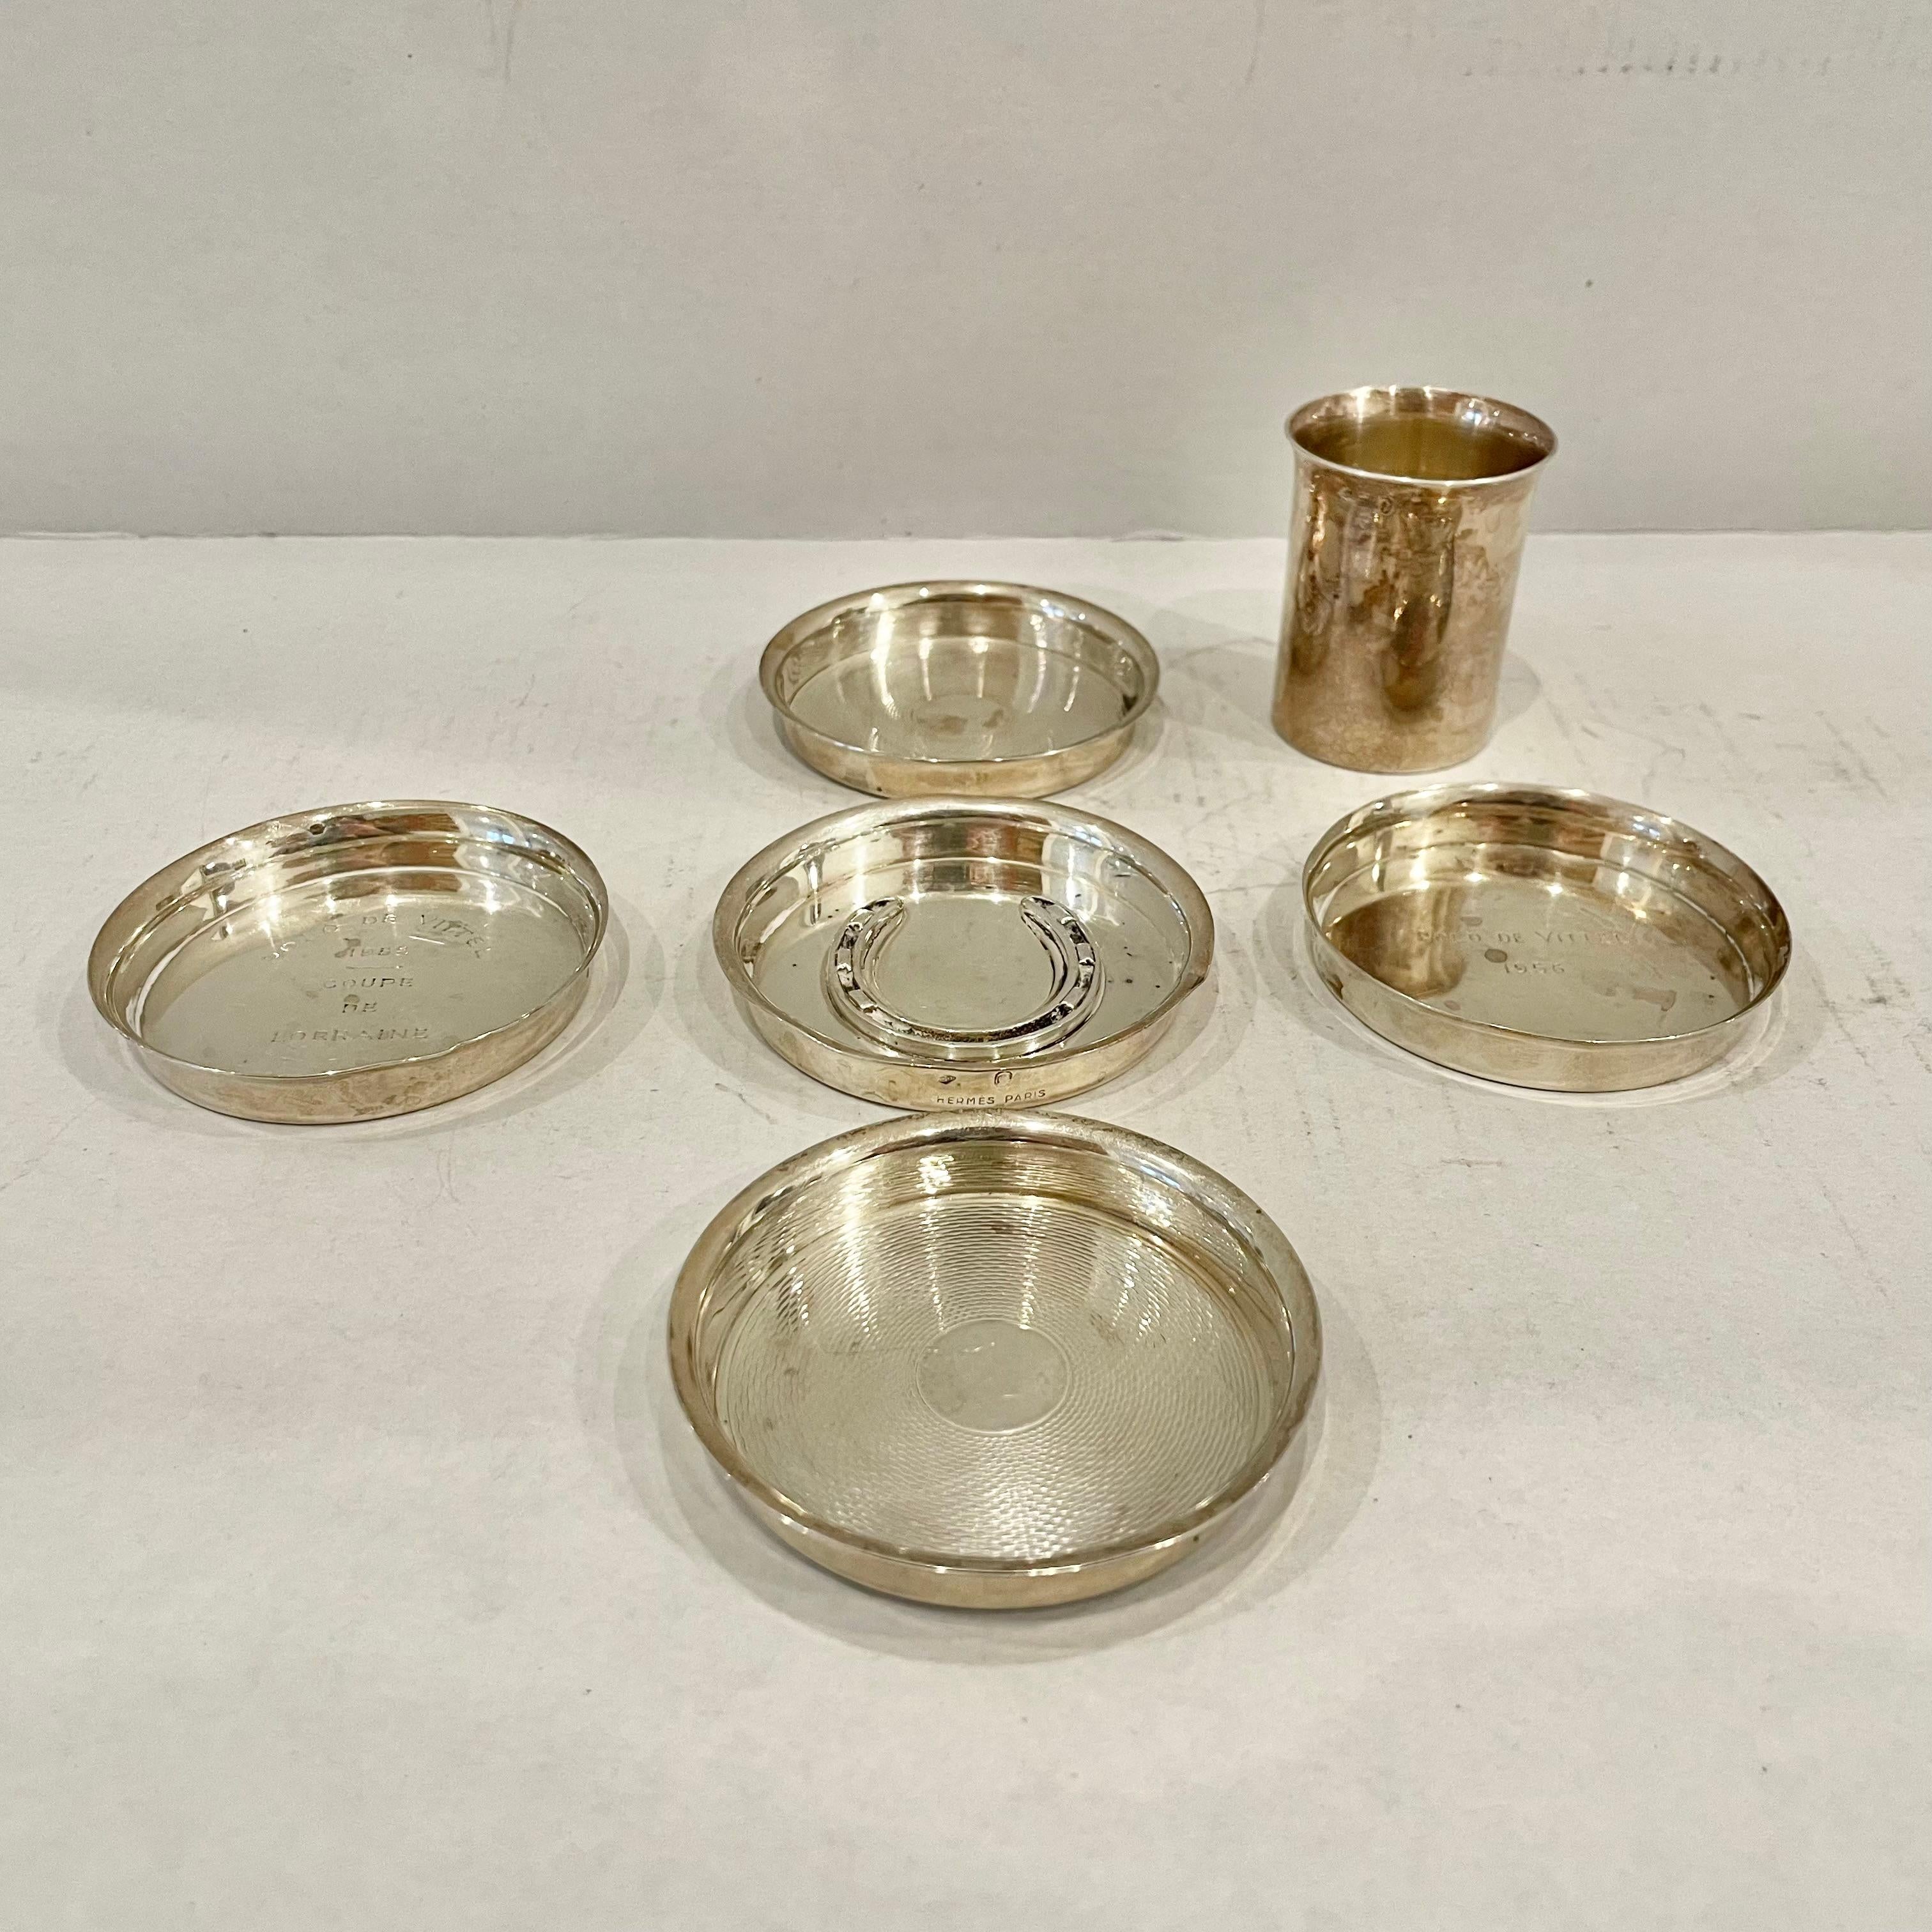 Set of 6 Hermes Silver Plated Jewelry Trays and Cup, 1950s France In Good Condition For Sale In Los Angeles, CA